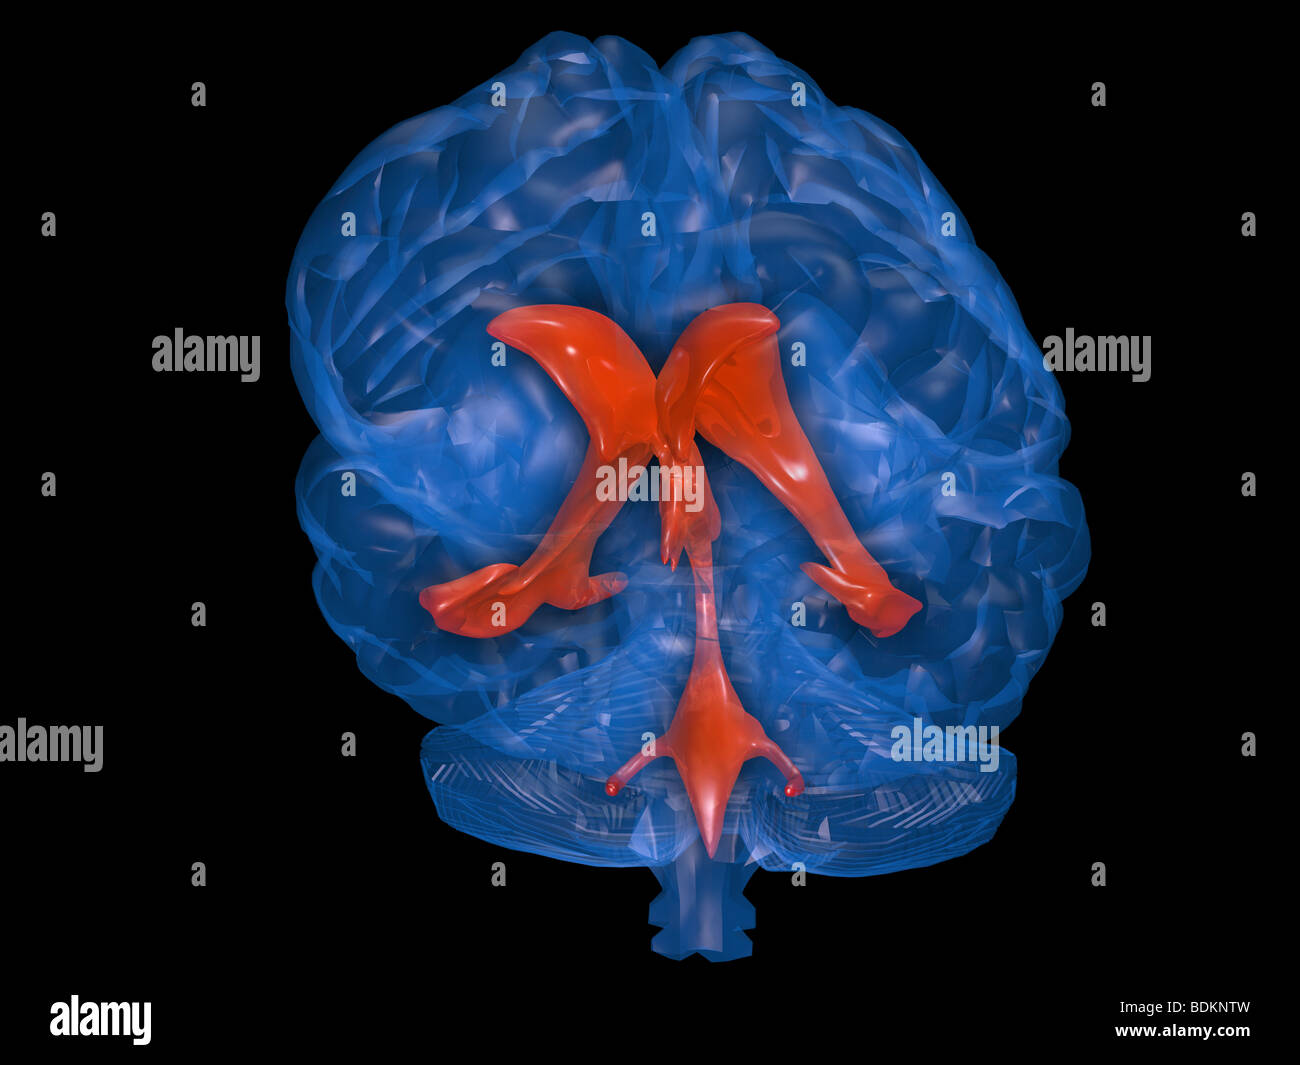 computer graphics model of the human brain showing the location of the cerebral spinal fluid ventricular system within the brain Stock Photo